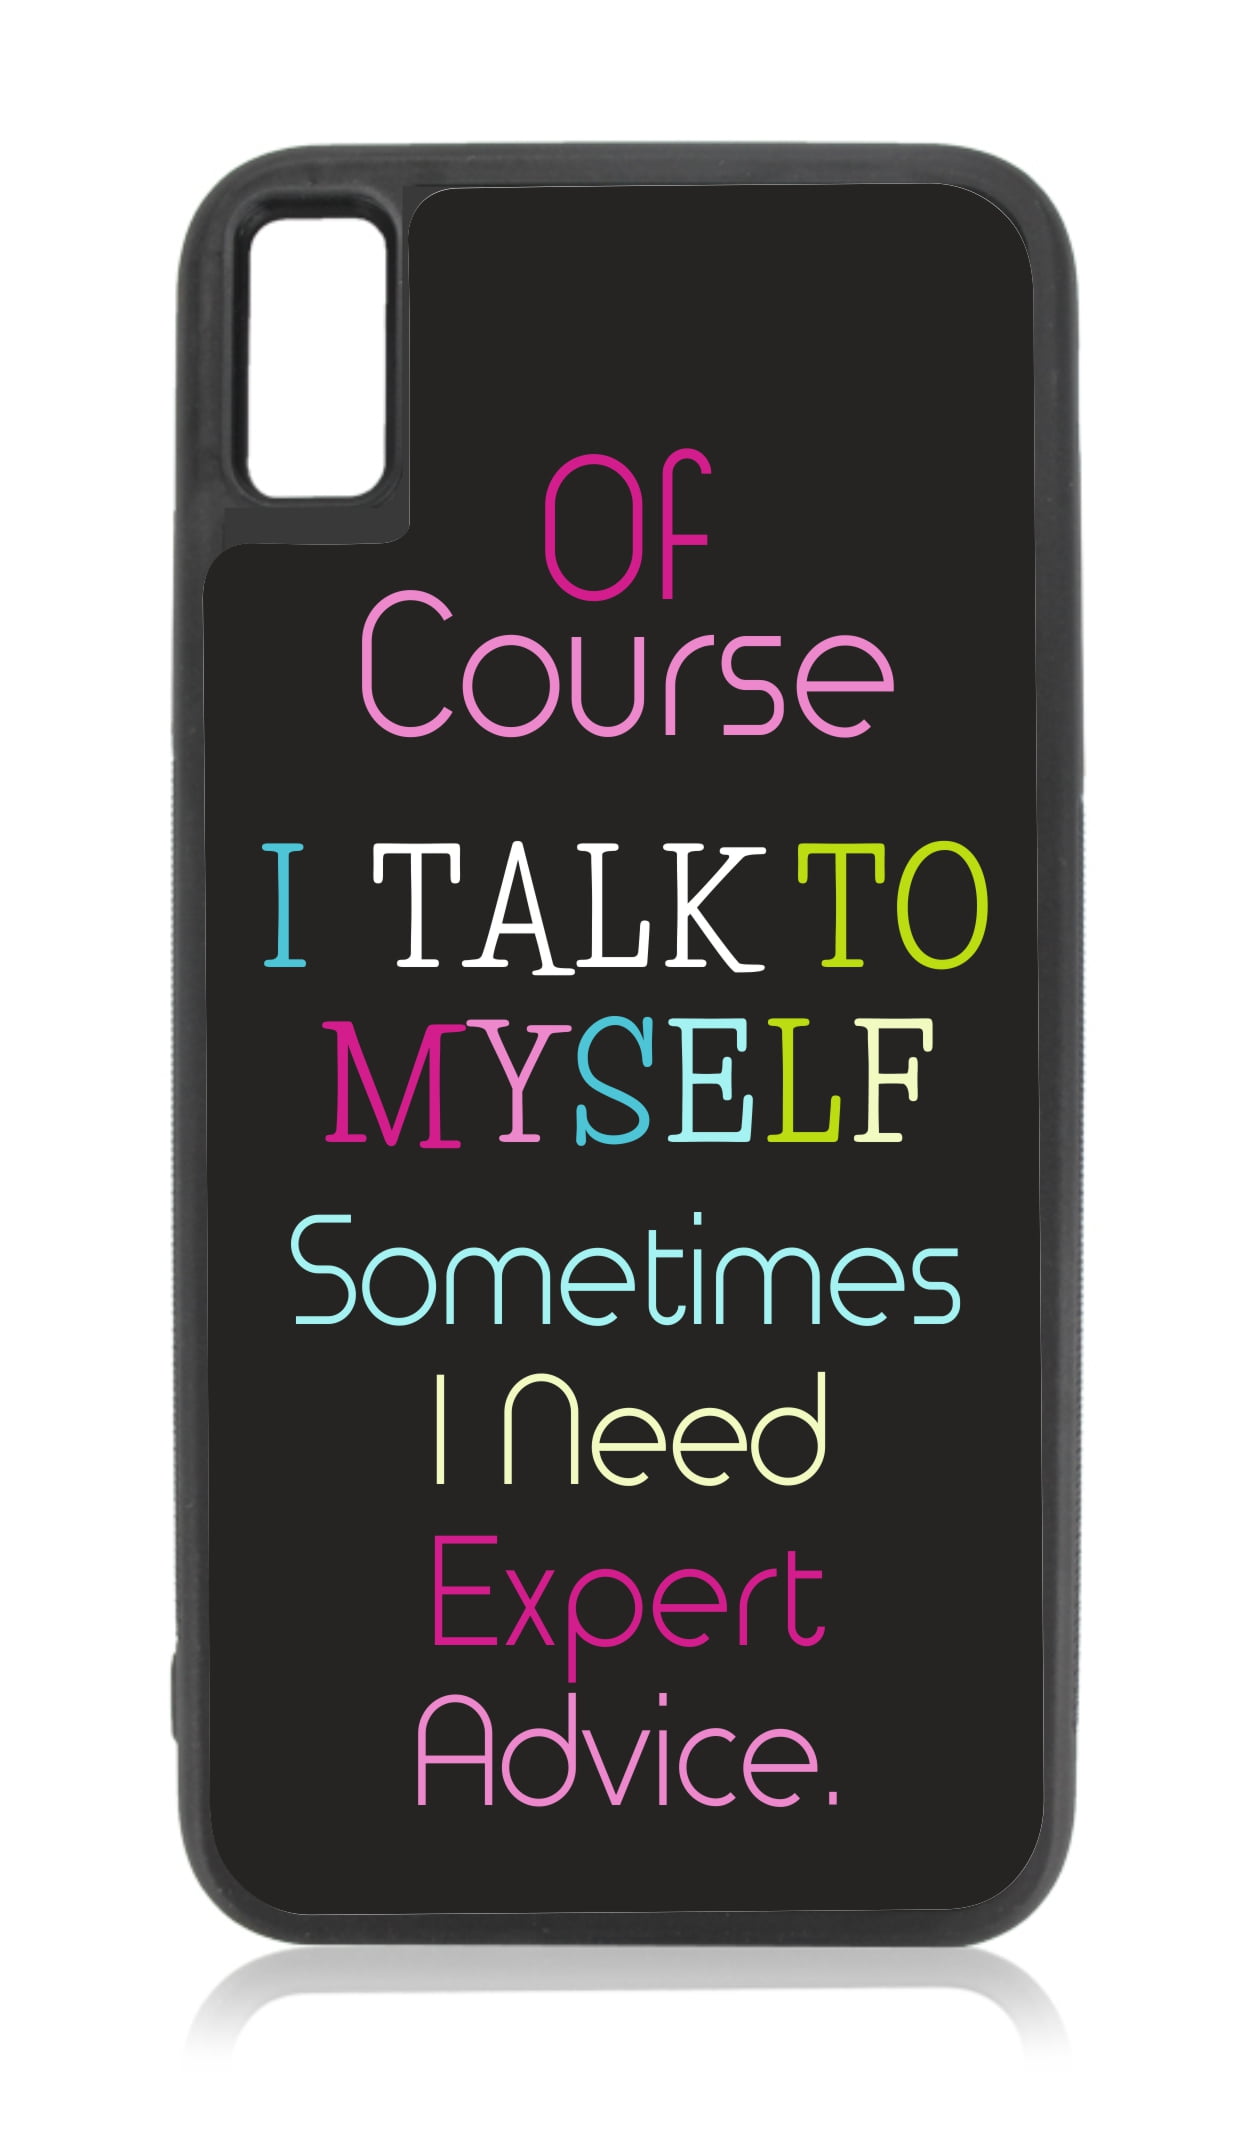 Advice Novelty iPhone XR Quote Cases - XR Quote Case Black Rubber Case for iPhone XR - iPhone XR ...